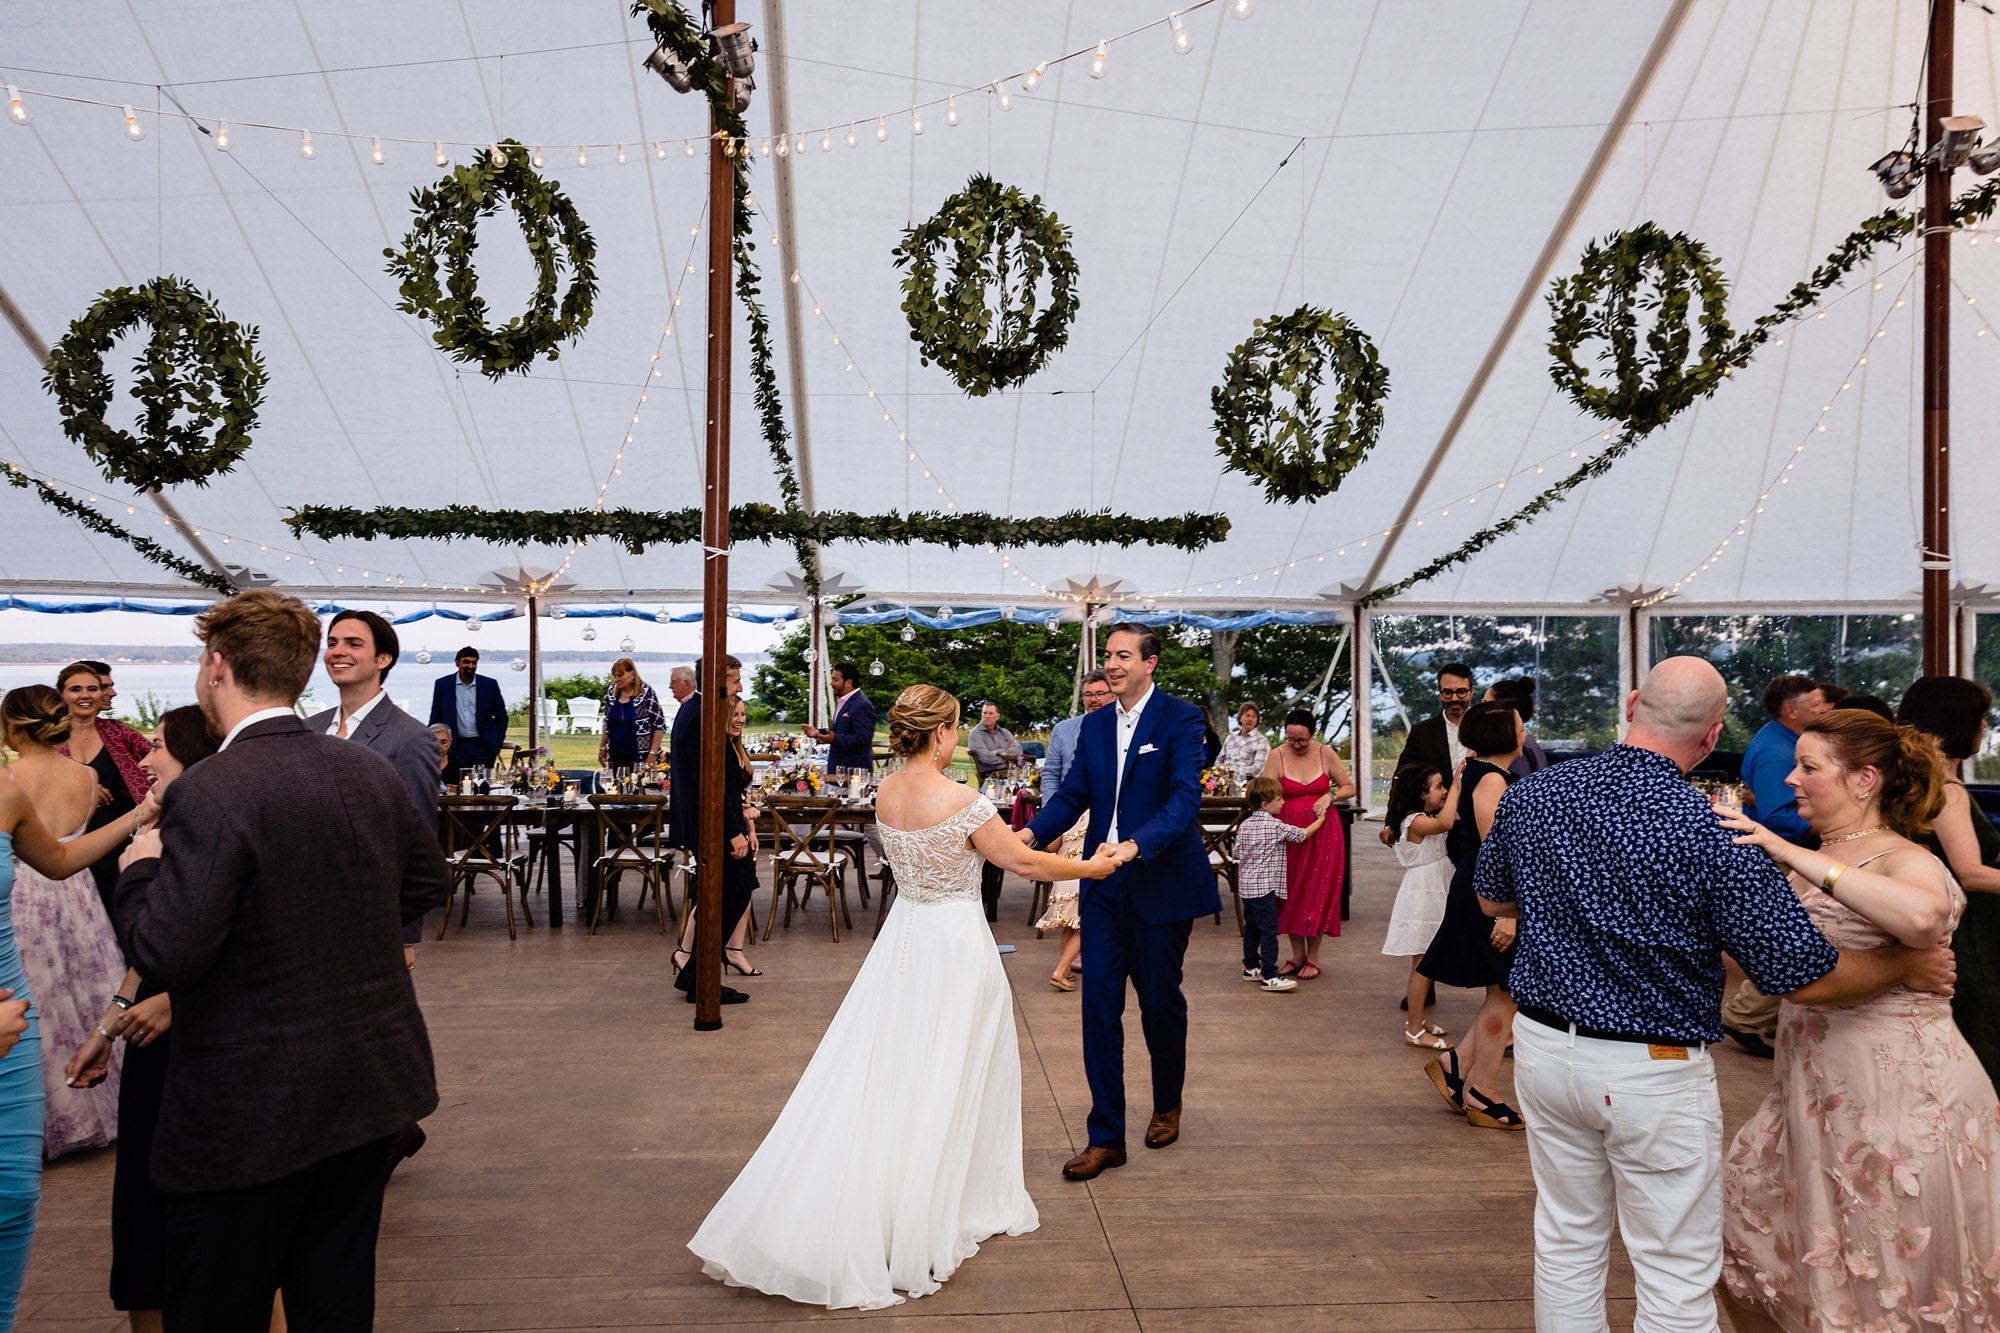 A wedding reception under a sailcloth tent at a midcoast wedding in Maine